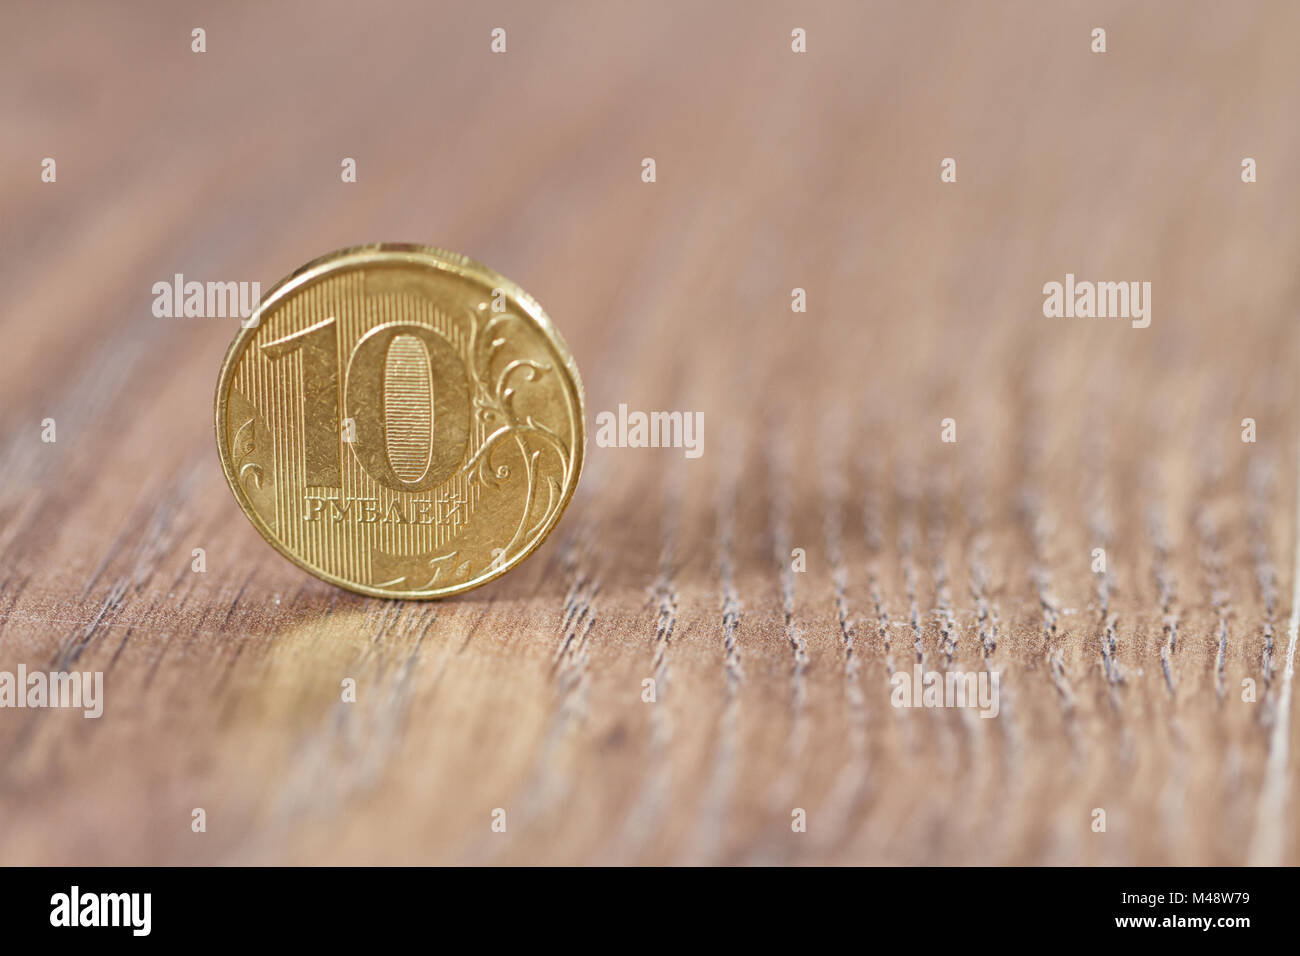 Gold coin ten robles worth on the wooden floor Stock Photo